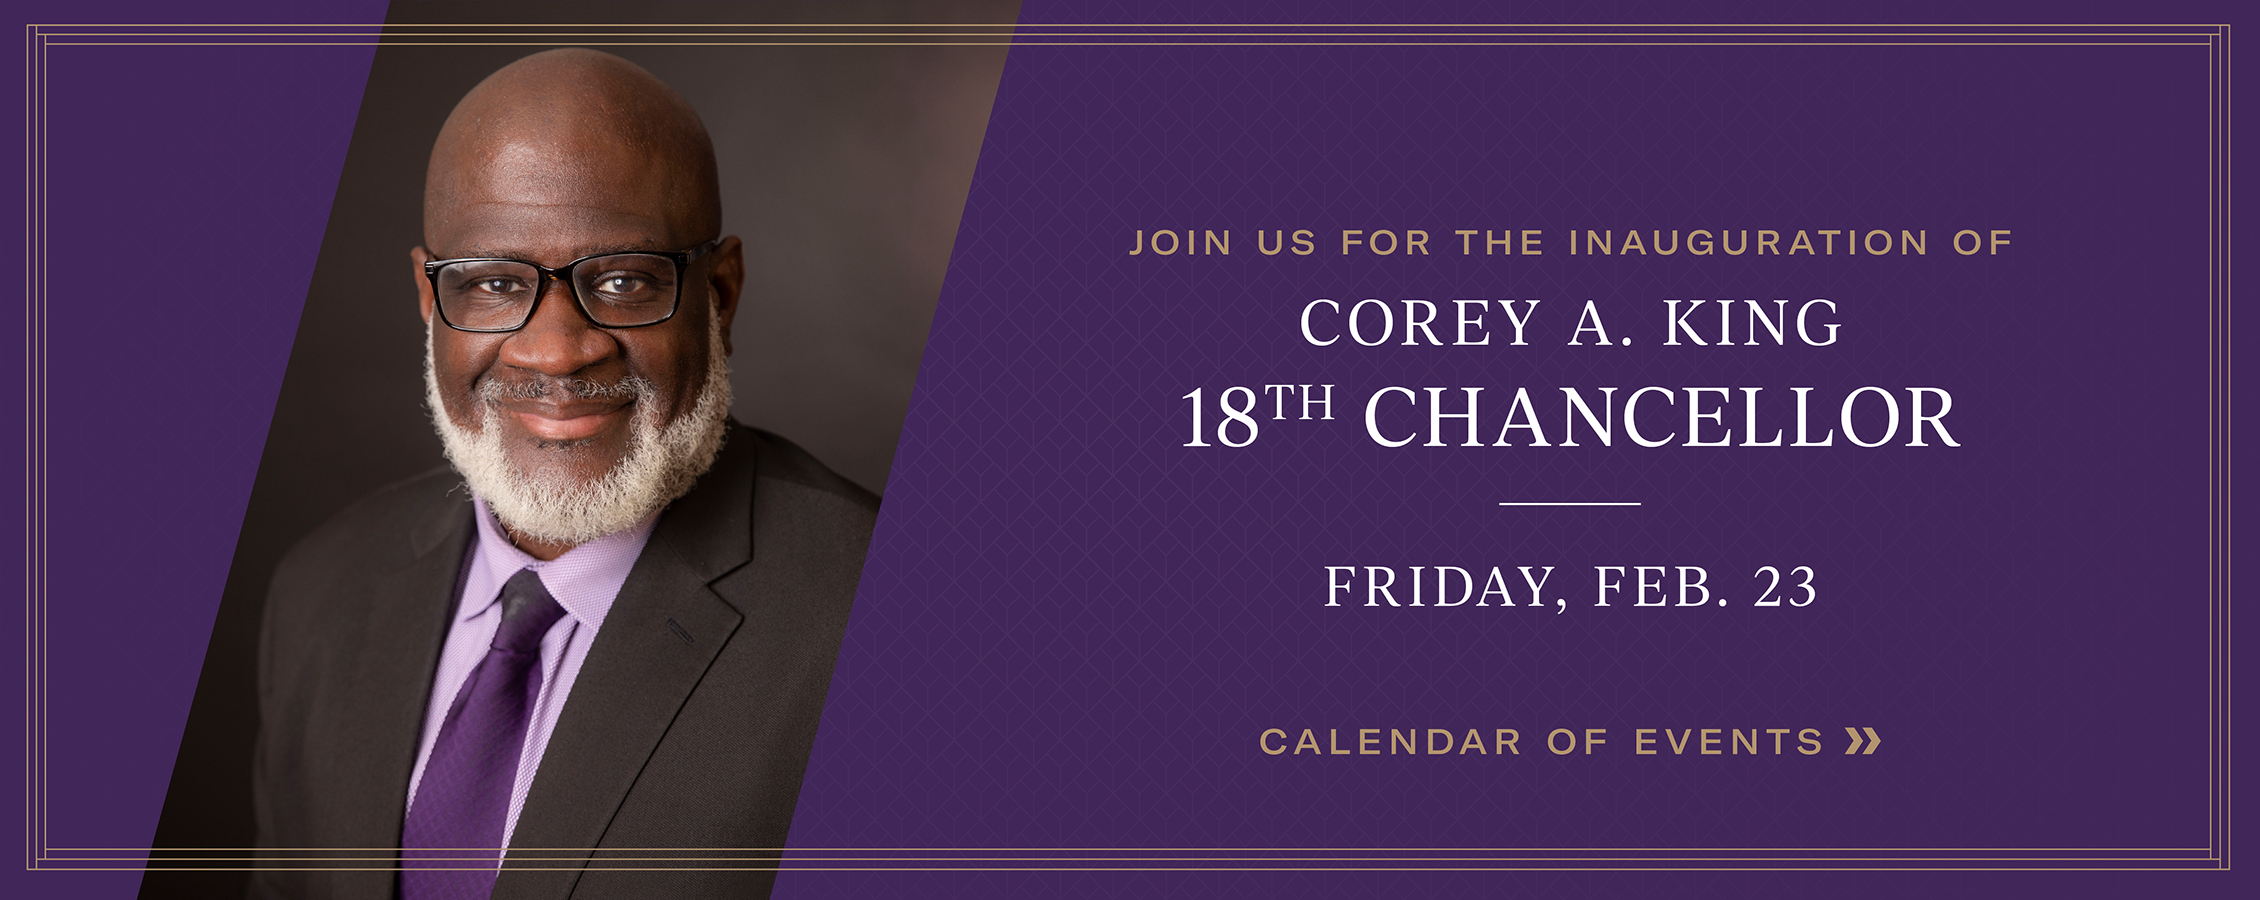 Photo of Chancellor King that says join us for the inauguration of Corey A. King.